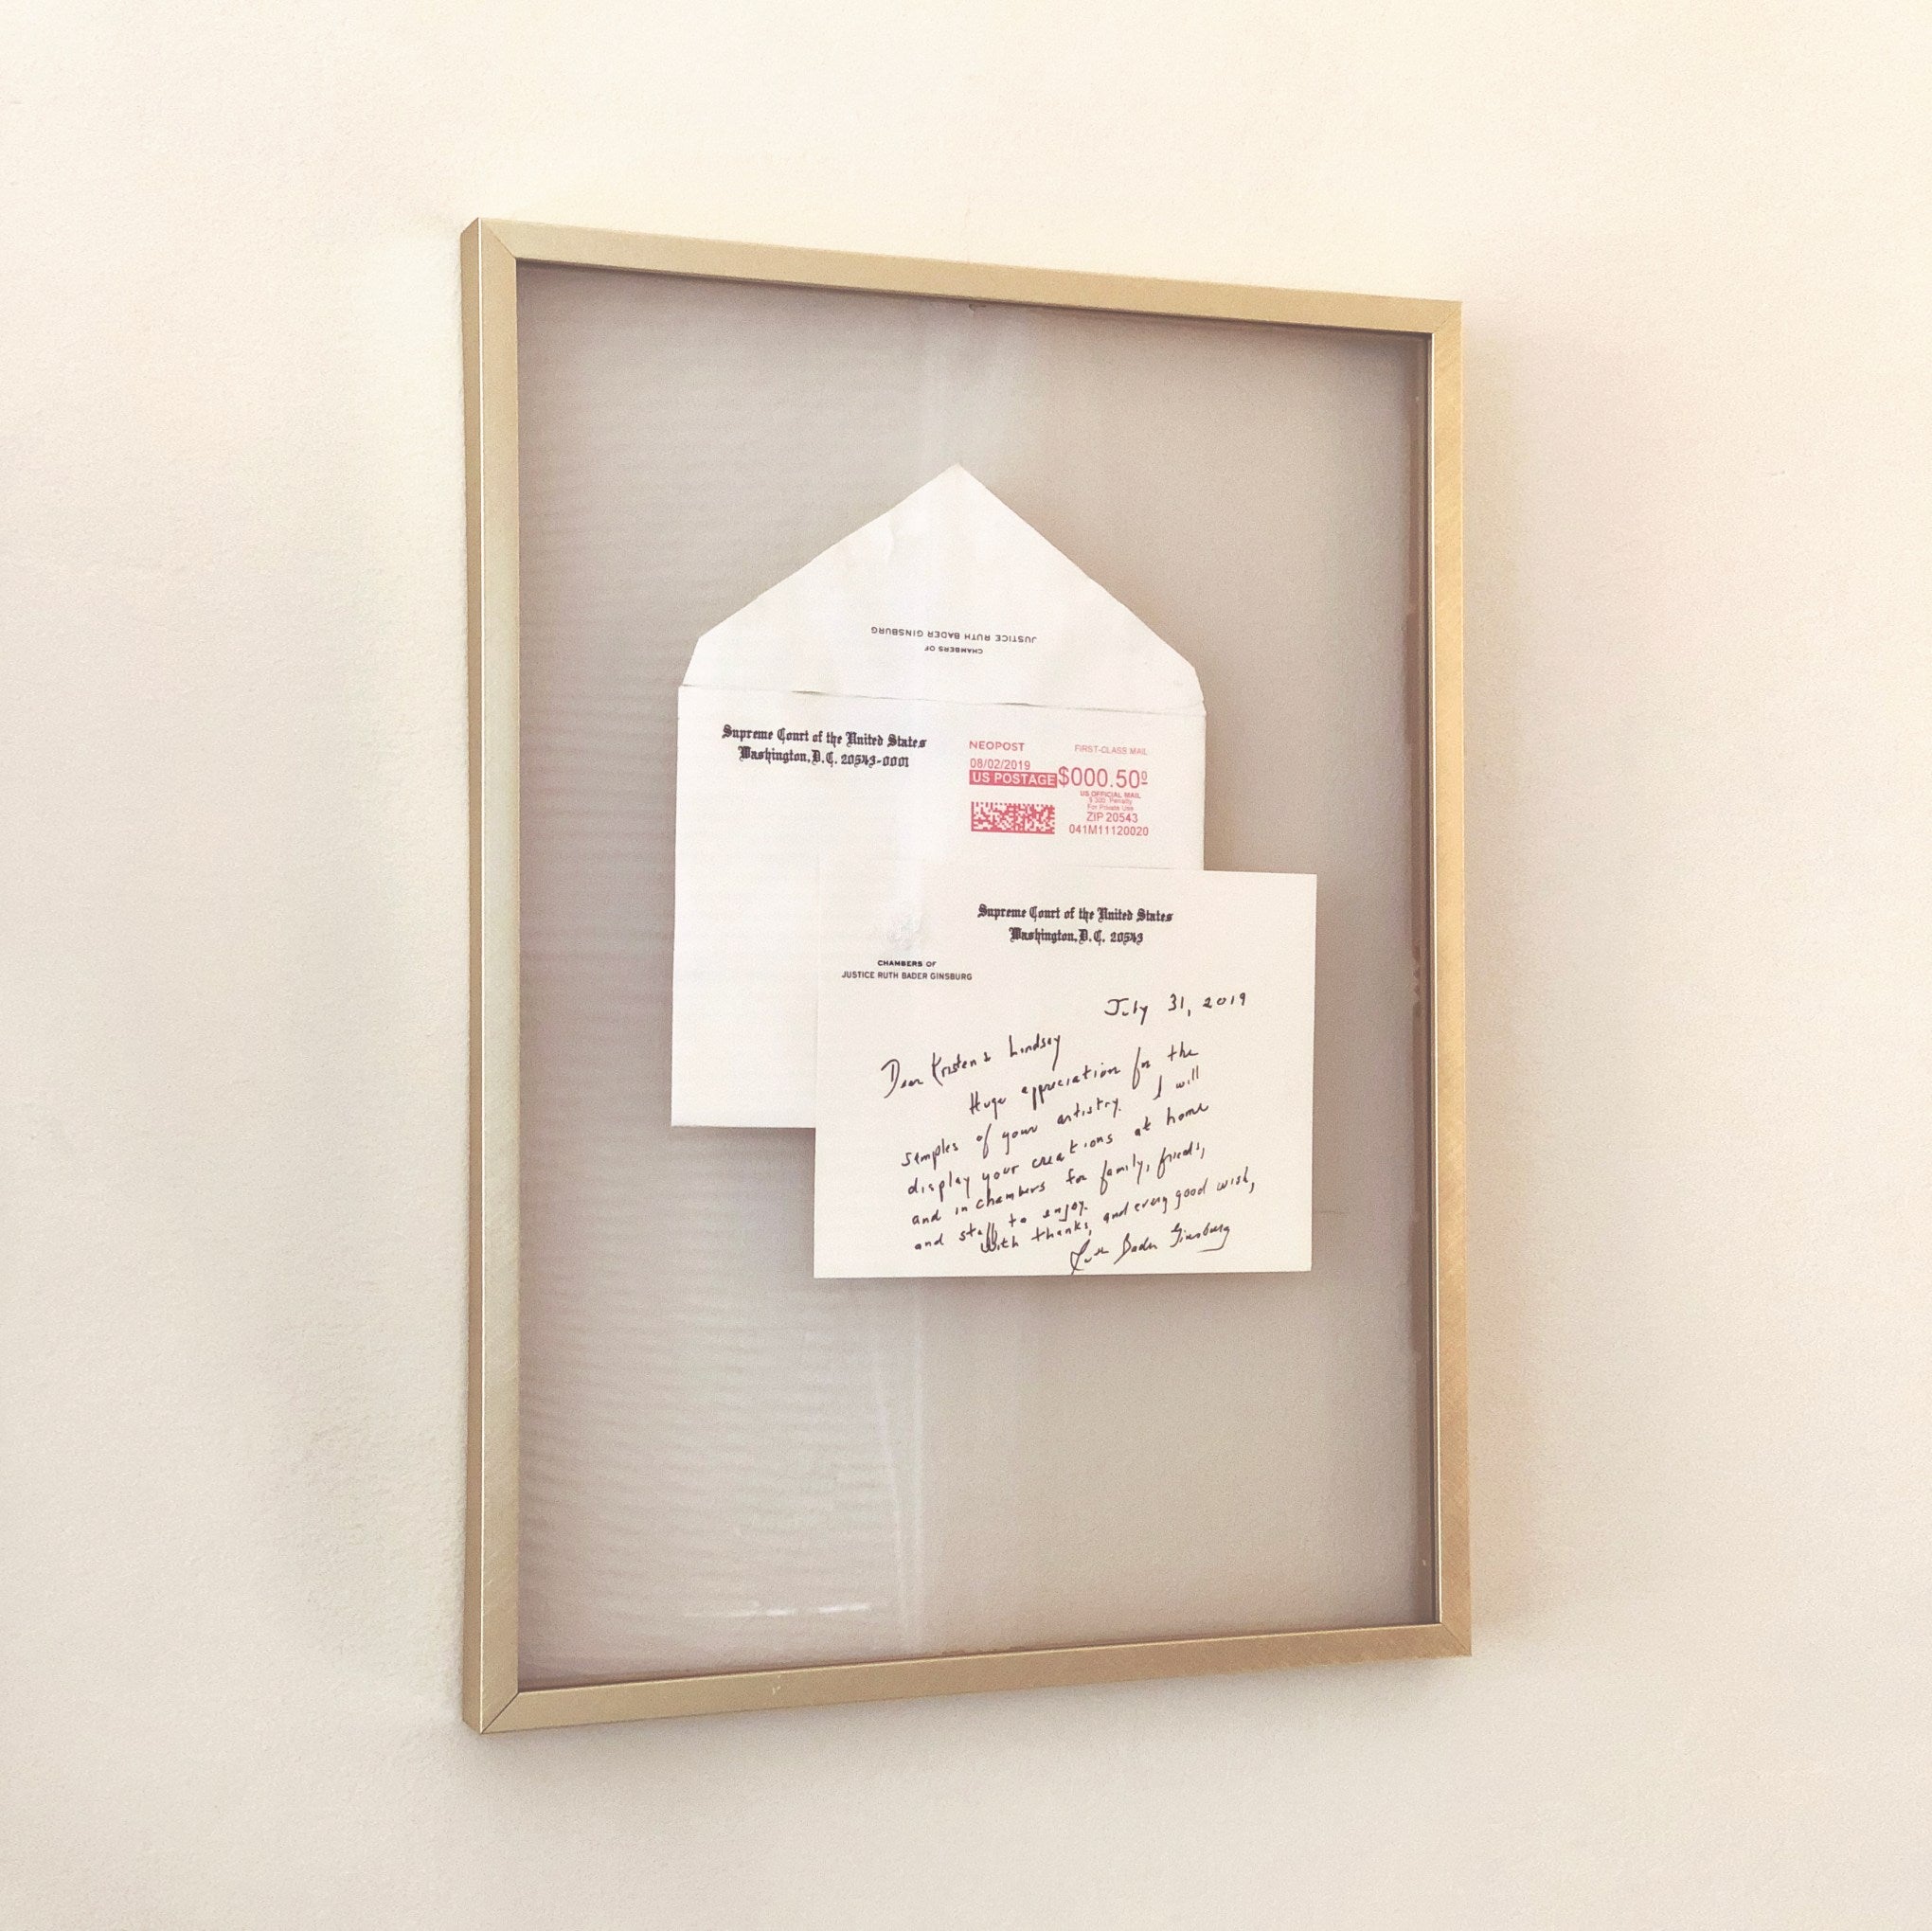 Framed letter from Ruth Bader Ginsburg to Kristen and Lindsey Archer of ARCHd